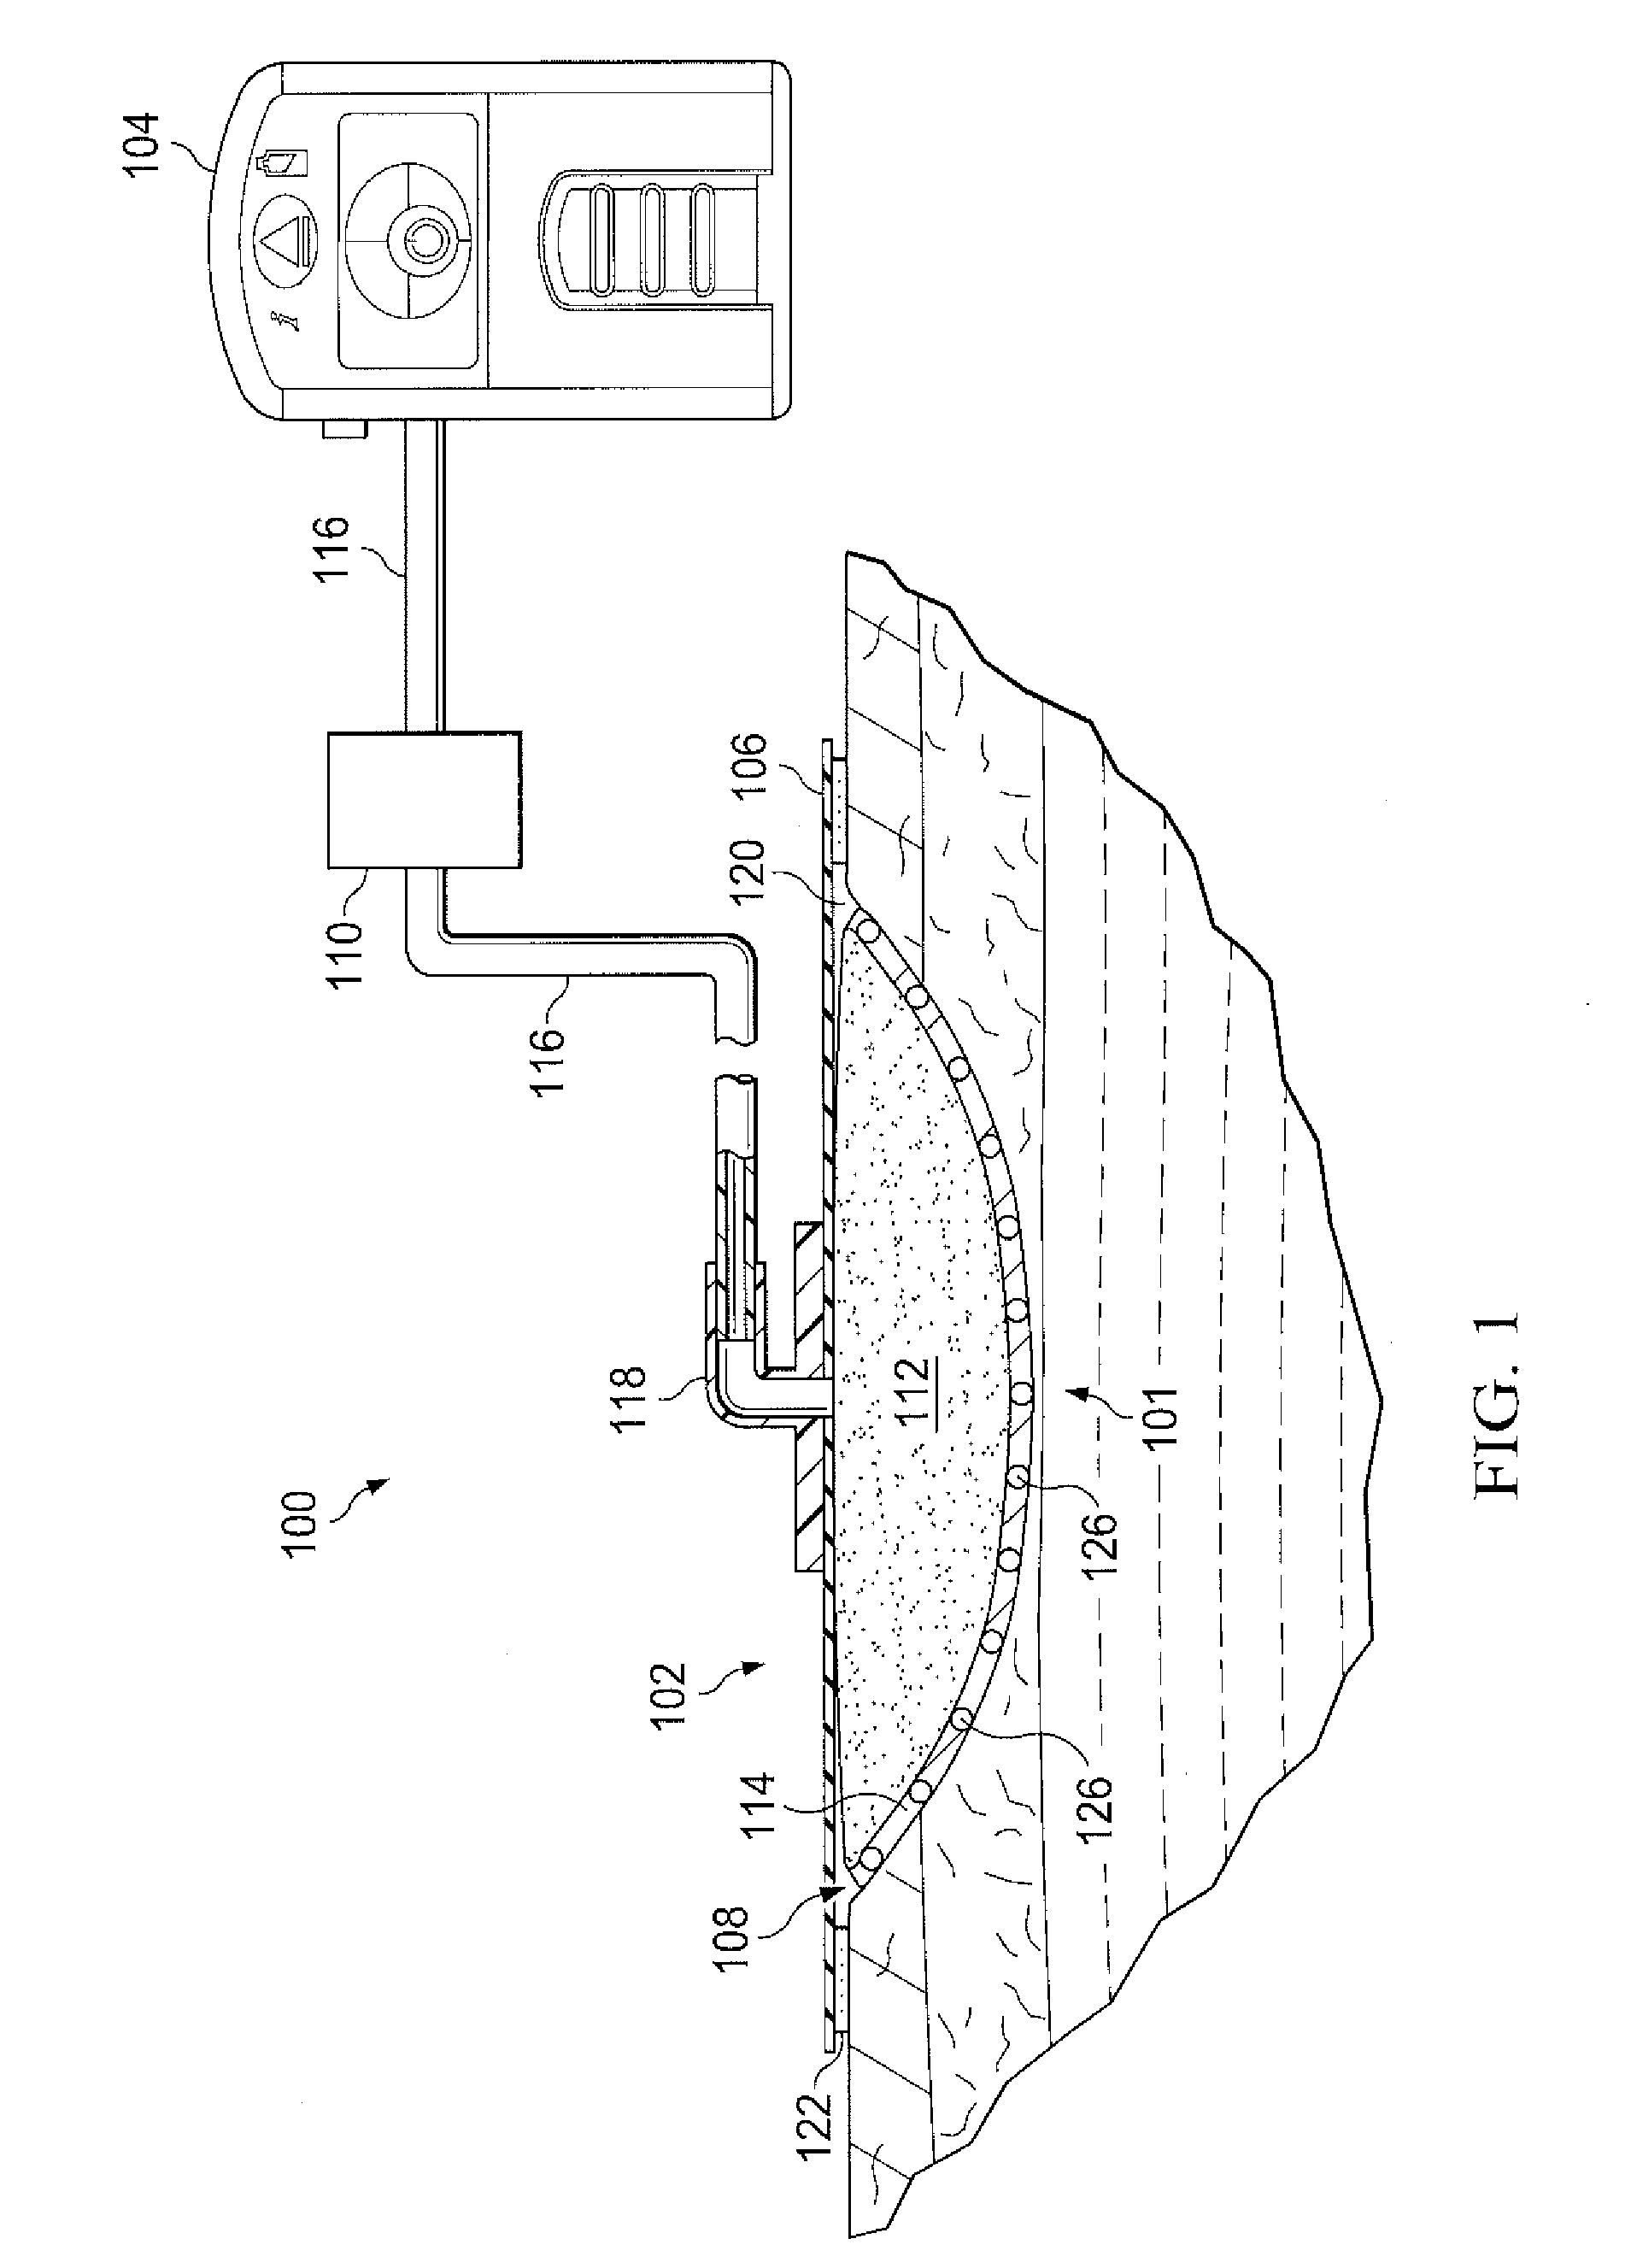 Protease modulating wound interface layer for use with negative pressure wound therapy